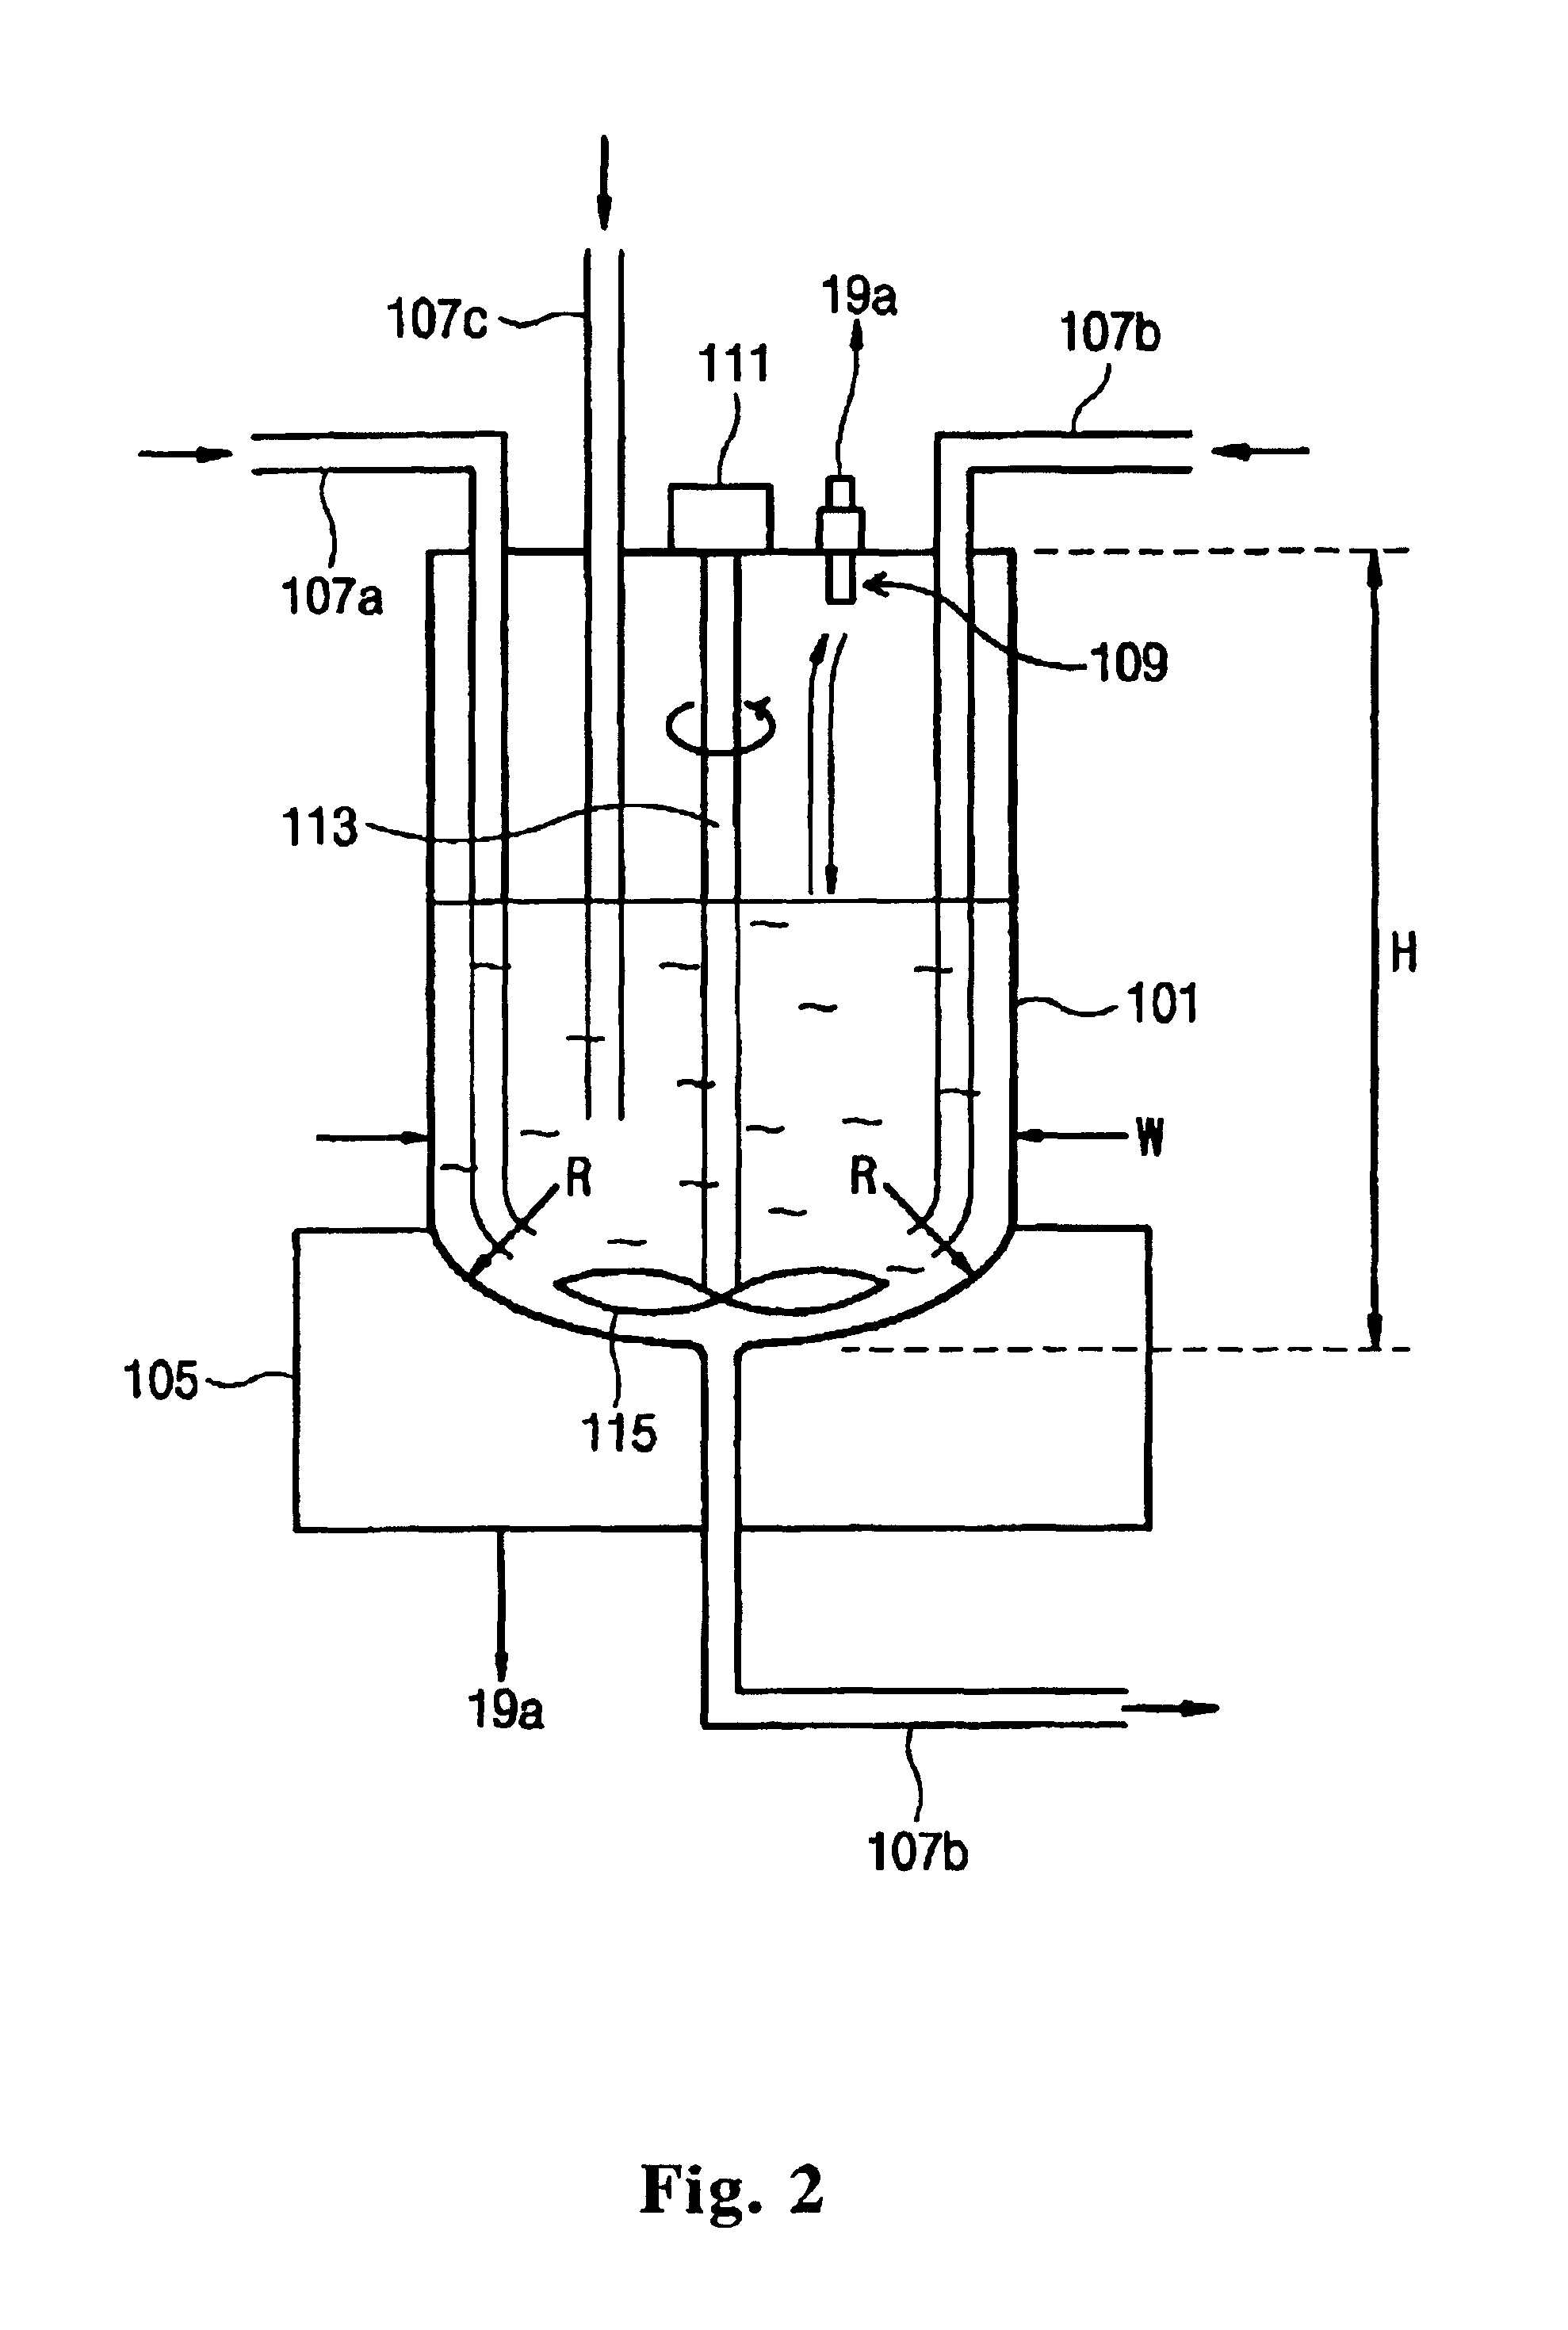 Method of supplying slurry and a slurry supply apparatus having a mixing unit at a point of use